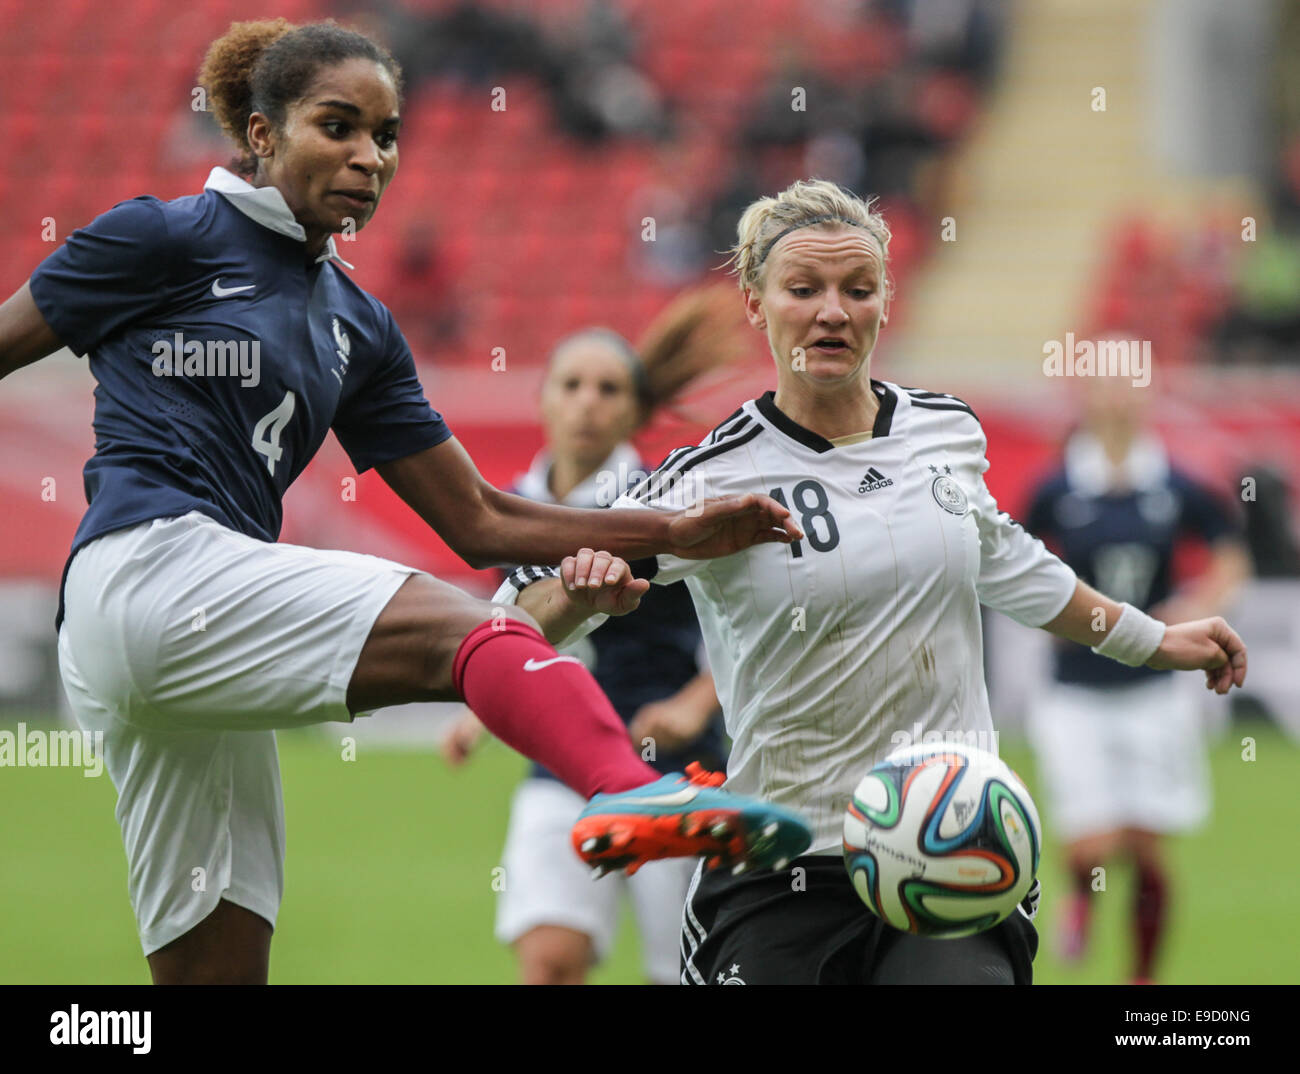 Offenbach, Germany. 25th Oct, 2014. France's Laura Georges (L) and Alexandra Popp (R) in action during the women's soccer international match between Germany and France in Offenbach, Germany, 25 October 2014. Photo: FRANK RUMPENHORST/dpa/Alamy Live News Stock Photo